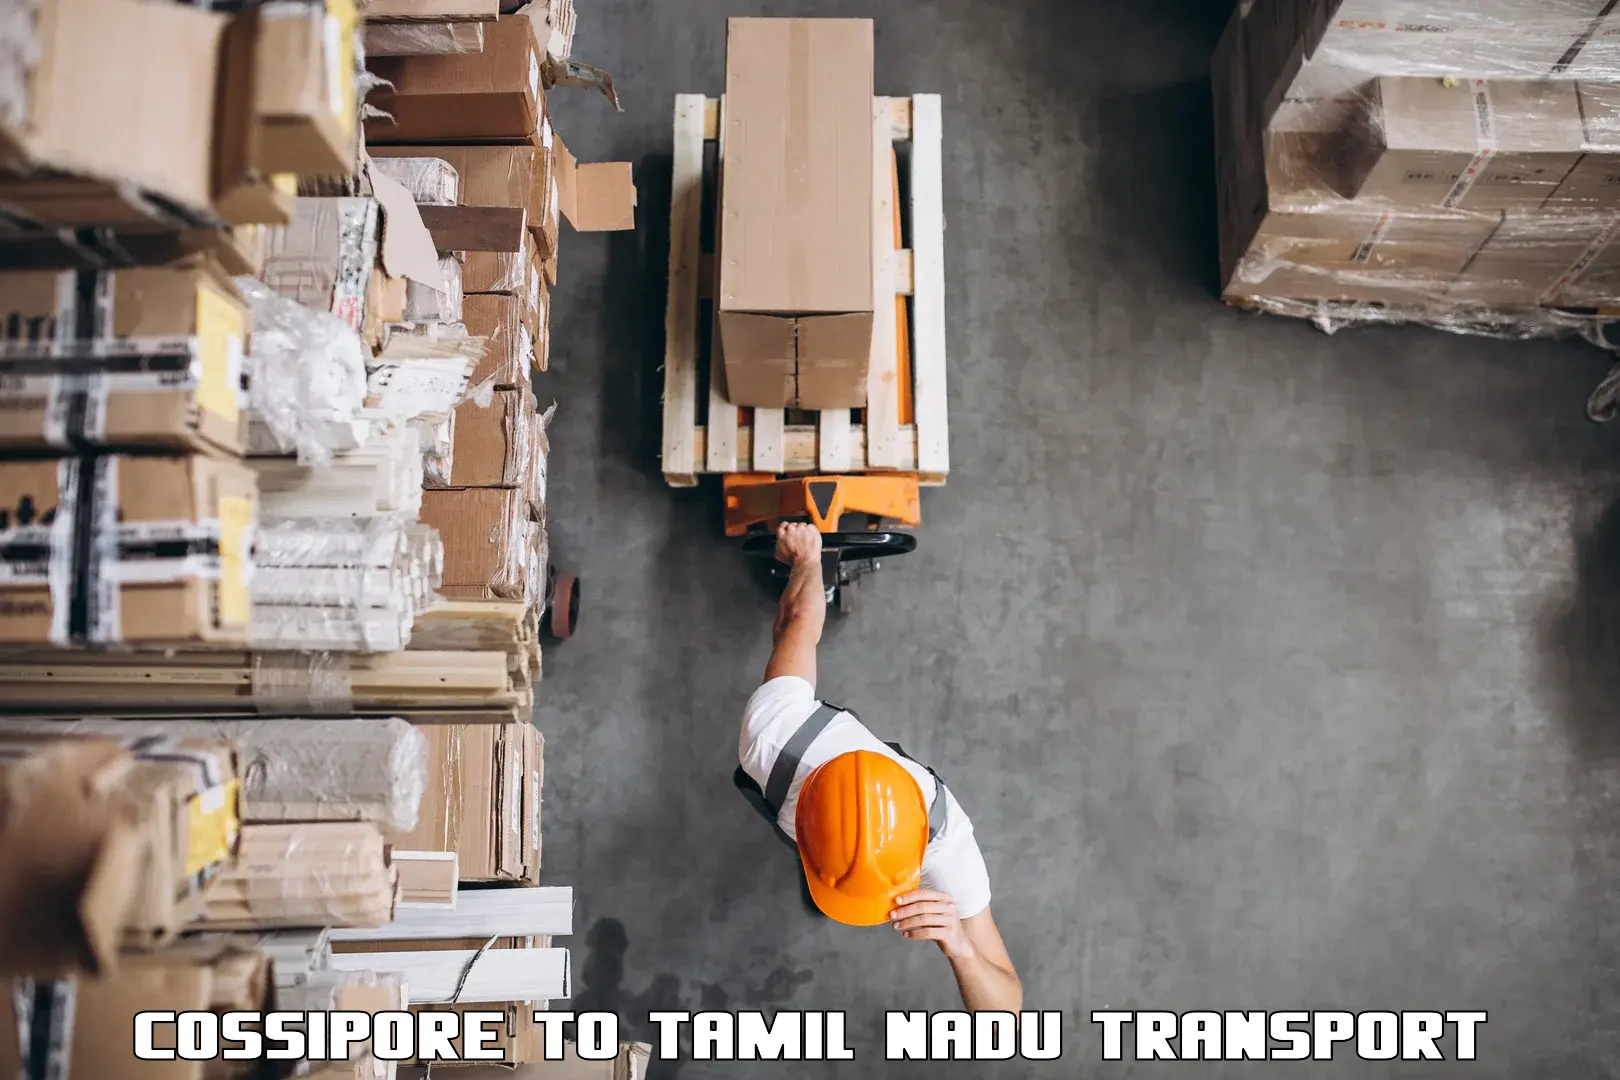 Two wheeler transport services Cossipore to Ennore Port Chennai